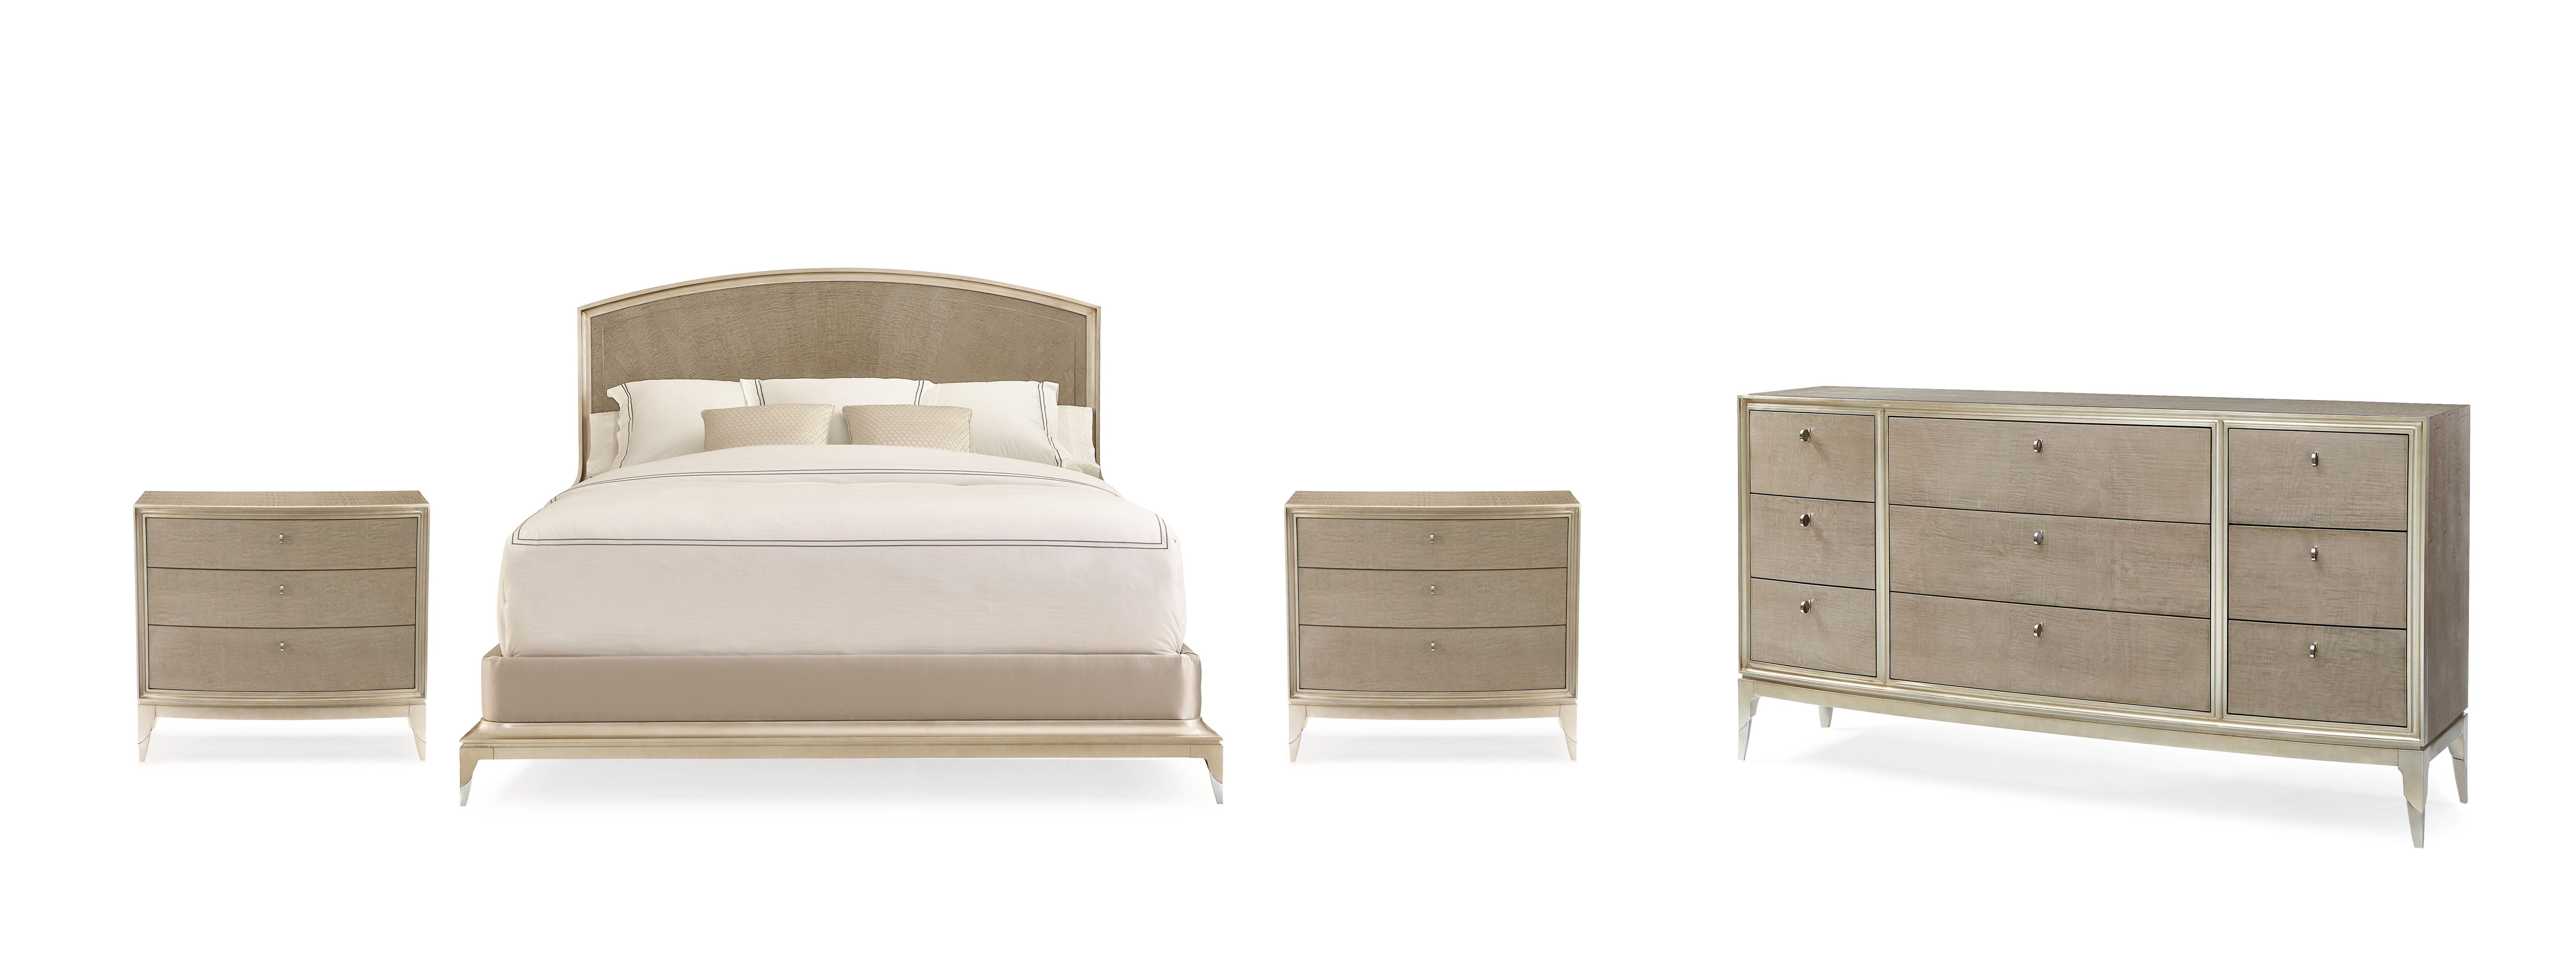 Contemporary Platform Bedroom Set RISE TO THE OCCASION / RISE AND SHINE CLA-417-105-Set-4 in Silver, Beige 